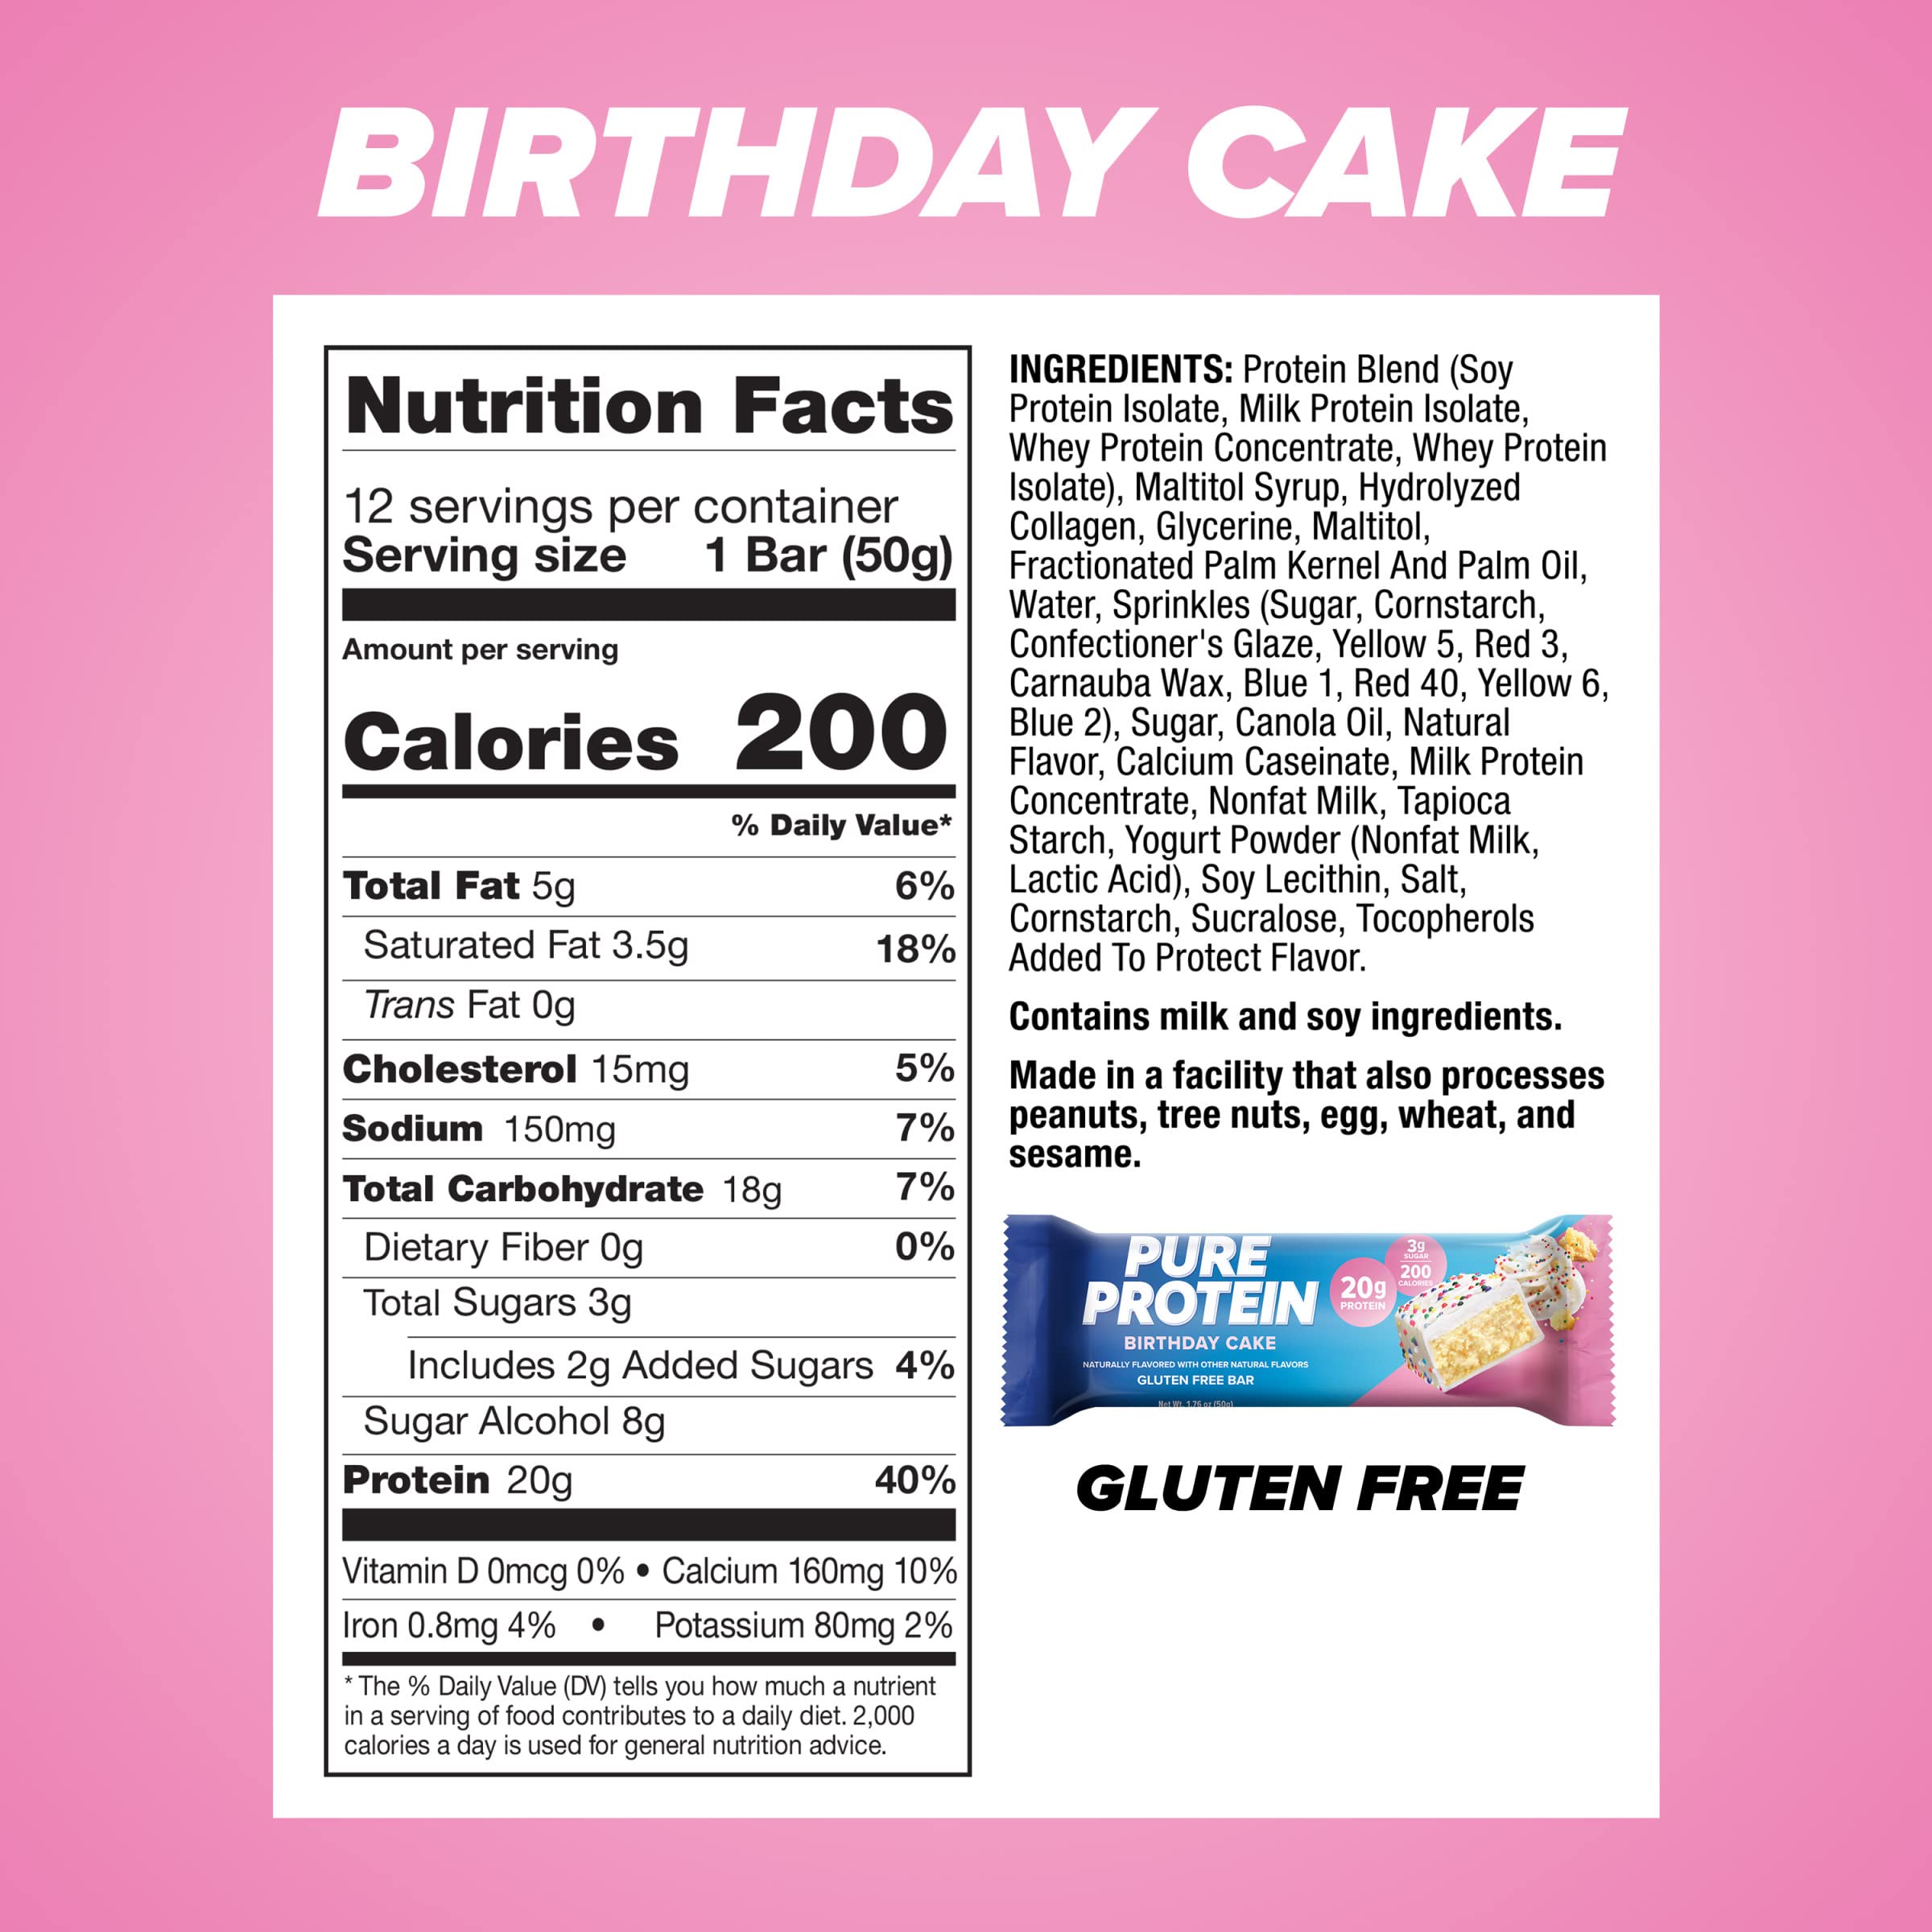 Pure Protein Bars, High Protein, Nutritious Snacks to Support Energy, Low Sugar, Gluten Free, Birthday Cake, 1.76 oz, Pack of 12 (Packaging May Vary)